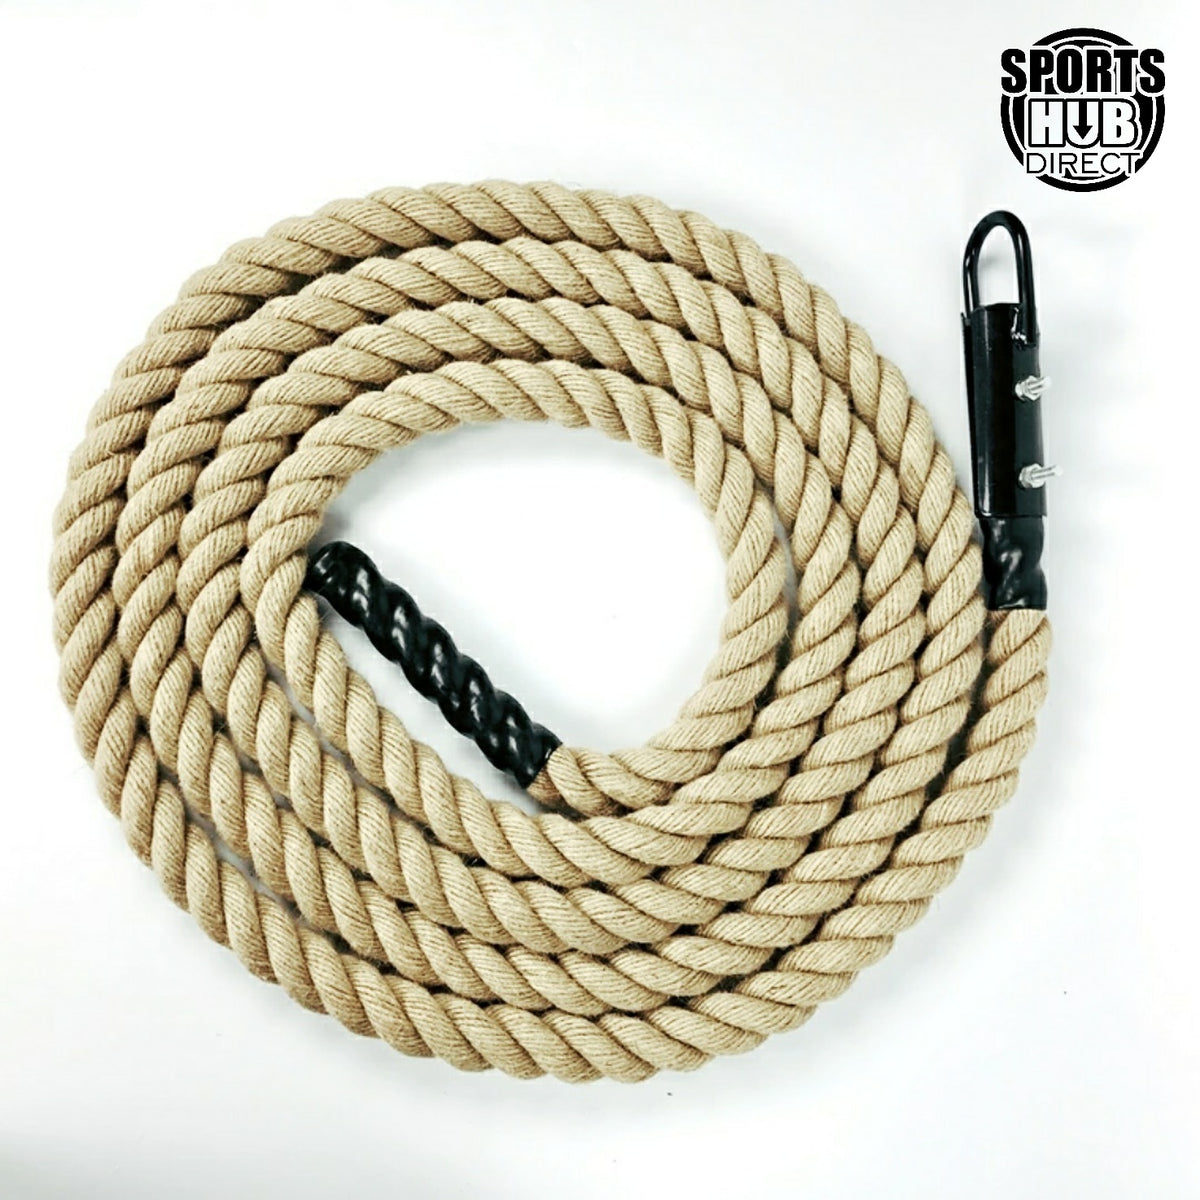 Climbing Rope with Ceiling Hook Attachment for CrossFit Obstacle Cours –  Sports Hub Direct